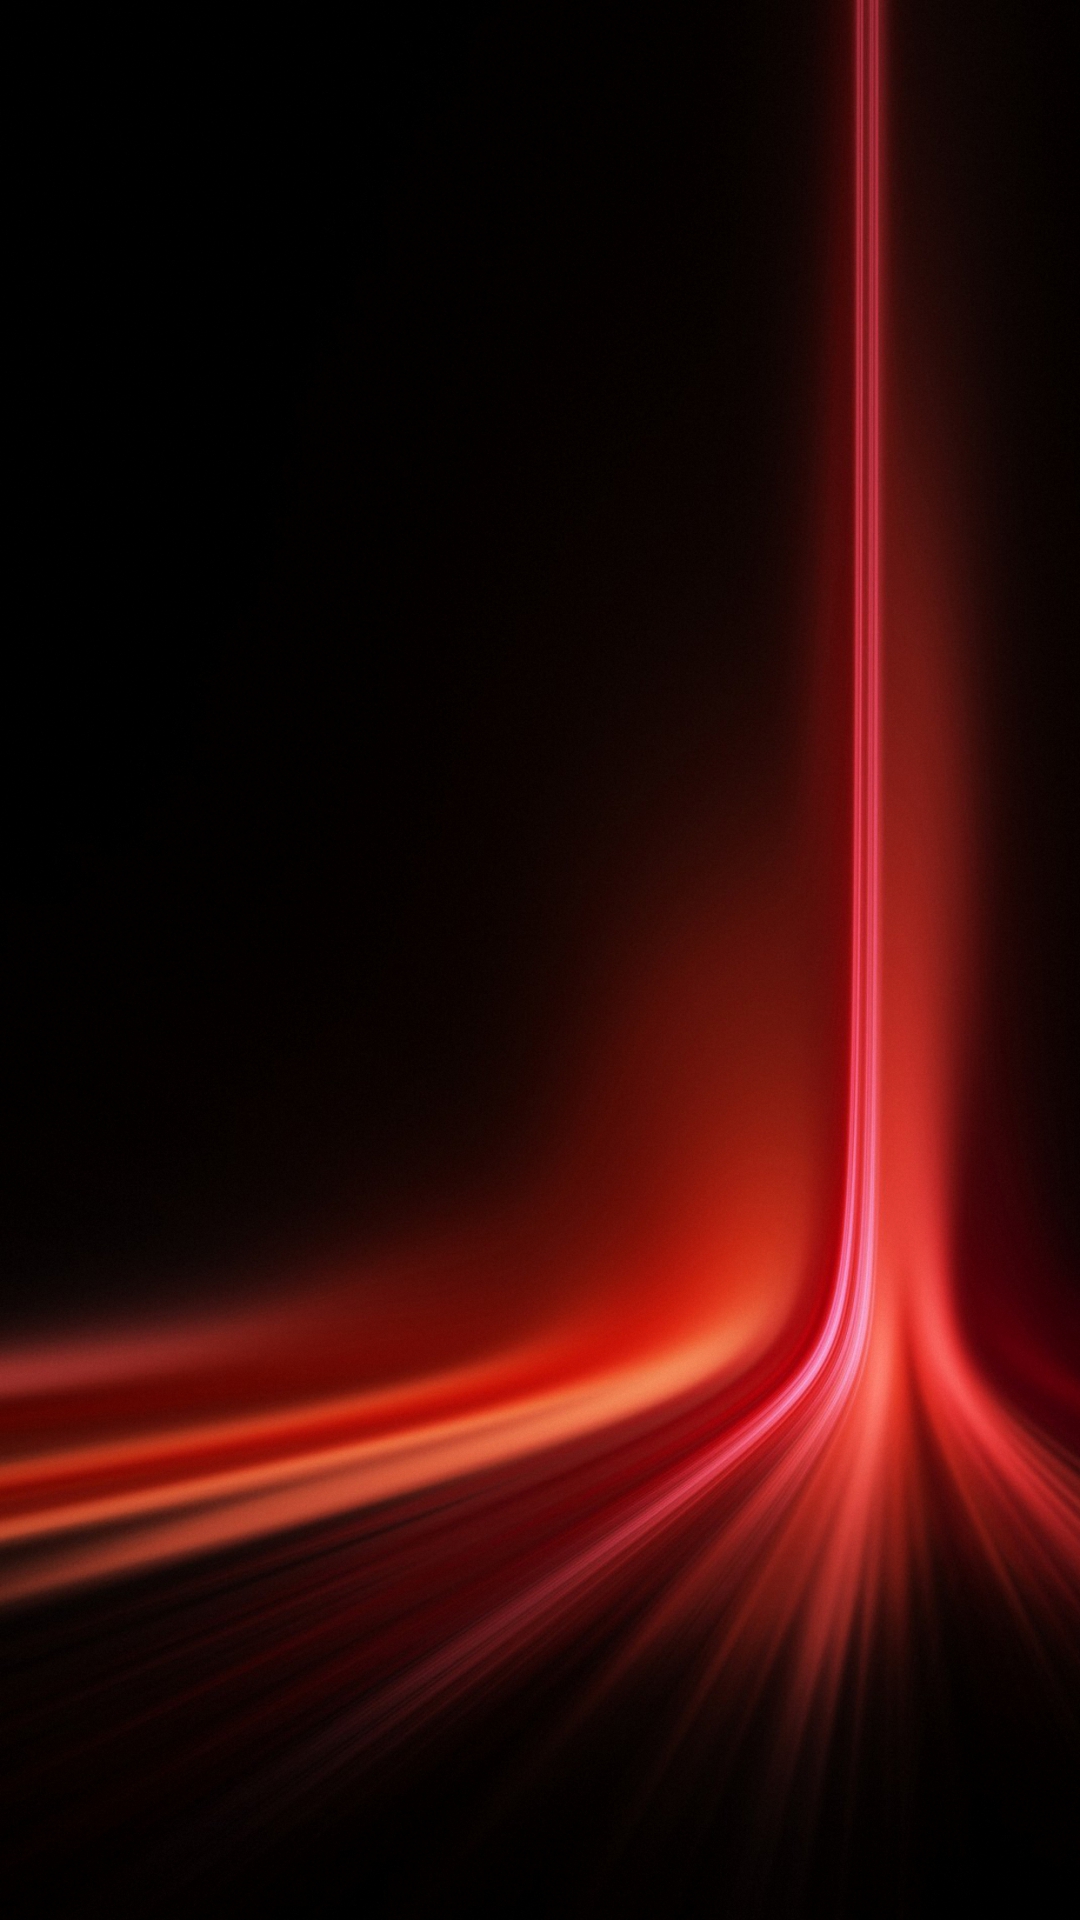 Free Download 6s Plus Hd 1080x19 Red Lines Iphone 6s Plus Wallpapers 1080x19 For Your Desktop Mobile Tablet Explore 50 Iphone 6s Plus Wallpaper Size Iphone 6s Plus Wallpaper